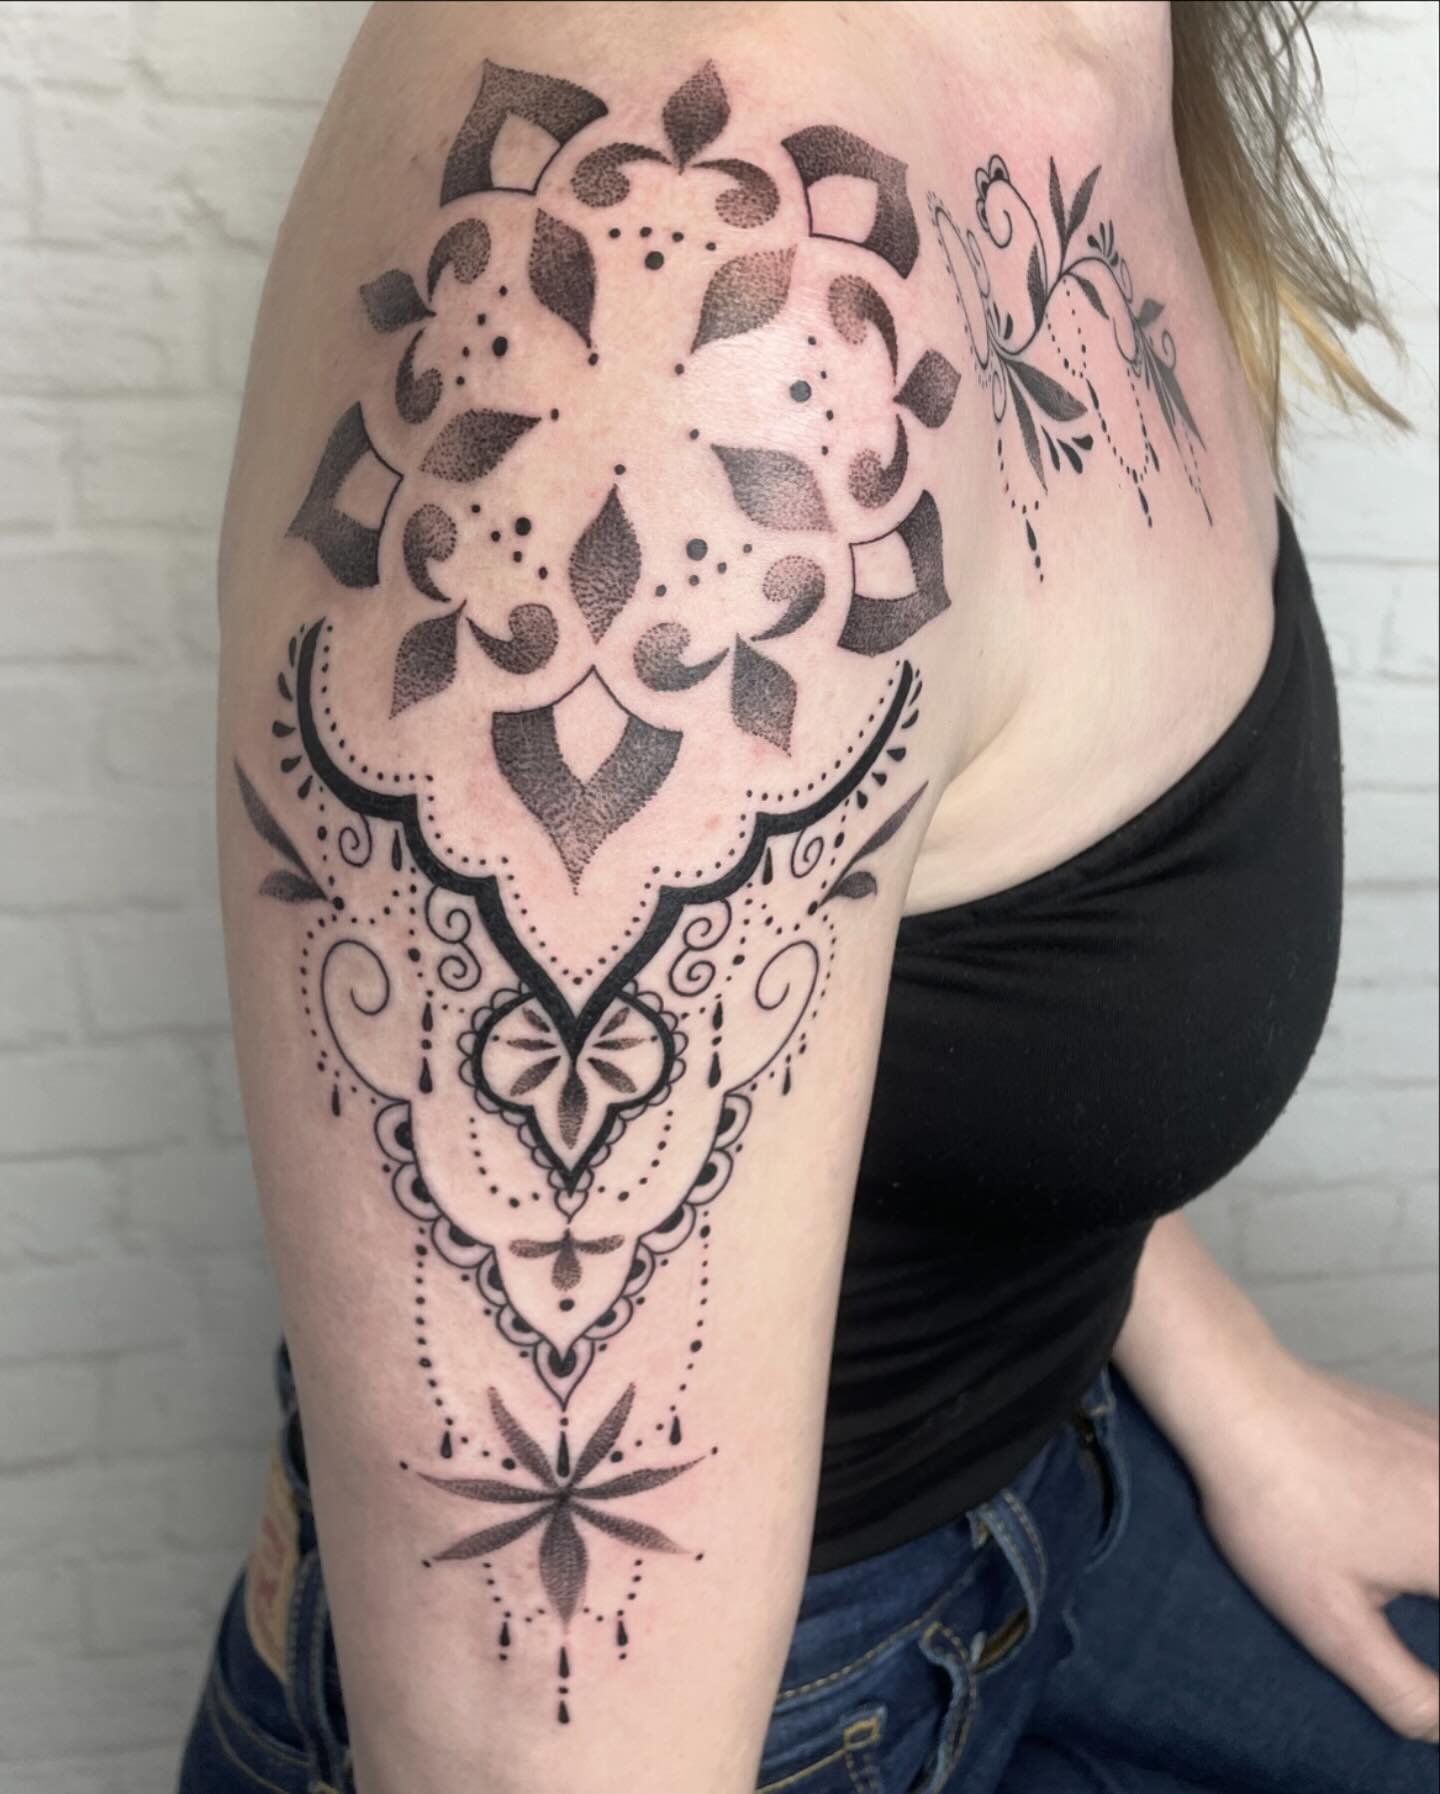 Clean ornamental work from @genevieveink swipe to see those details 😍

Genevieve is booking May, give the shop a call to get on her schedule! 720.904.8904

Using #thesolidink #dynamicink #eternalink #cheyennetattooequipment #ambitiontattoo_amz